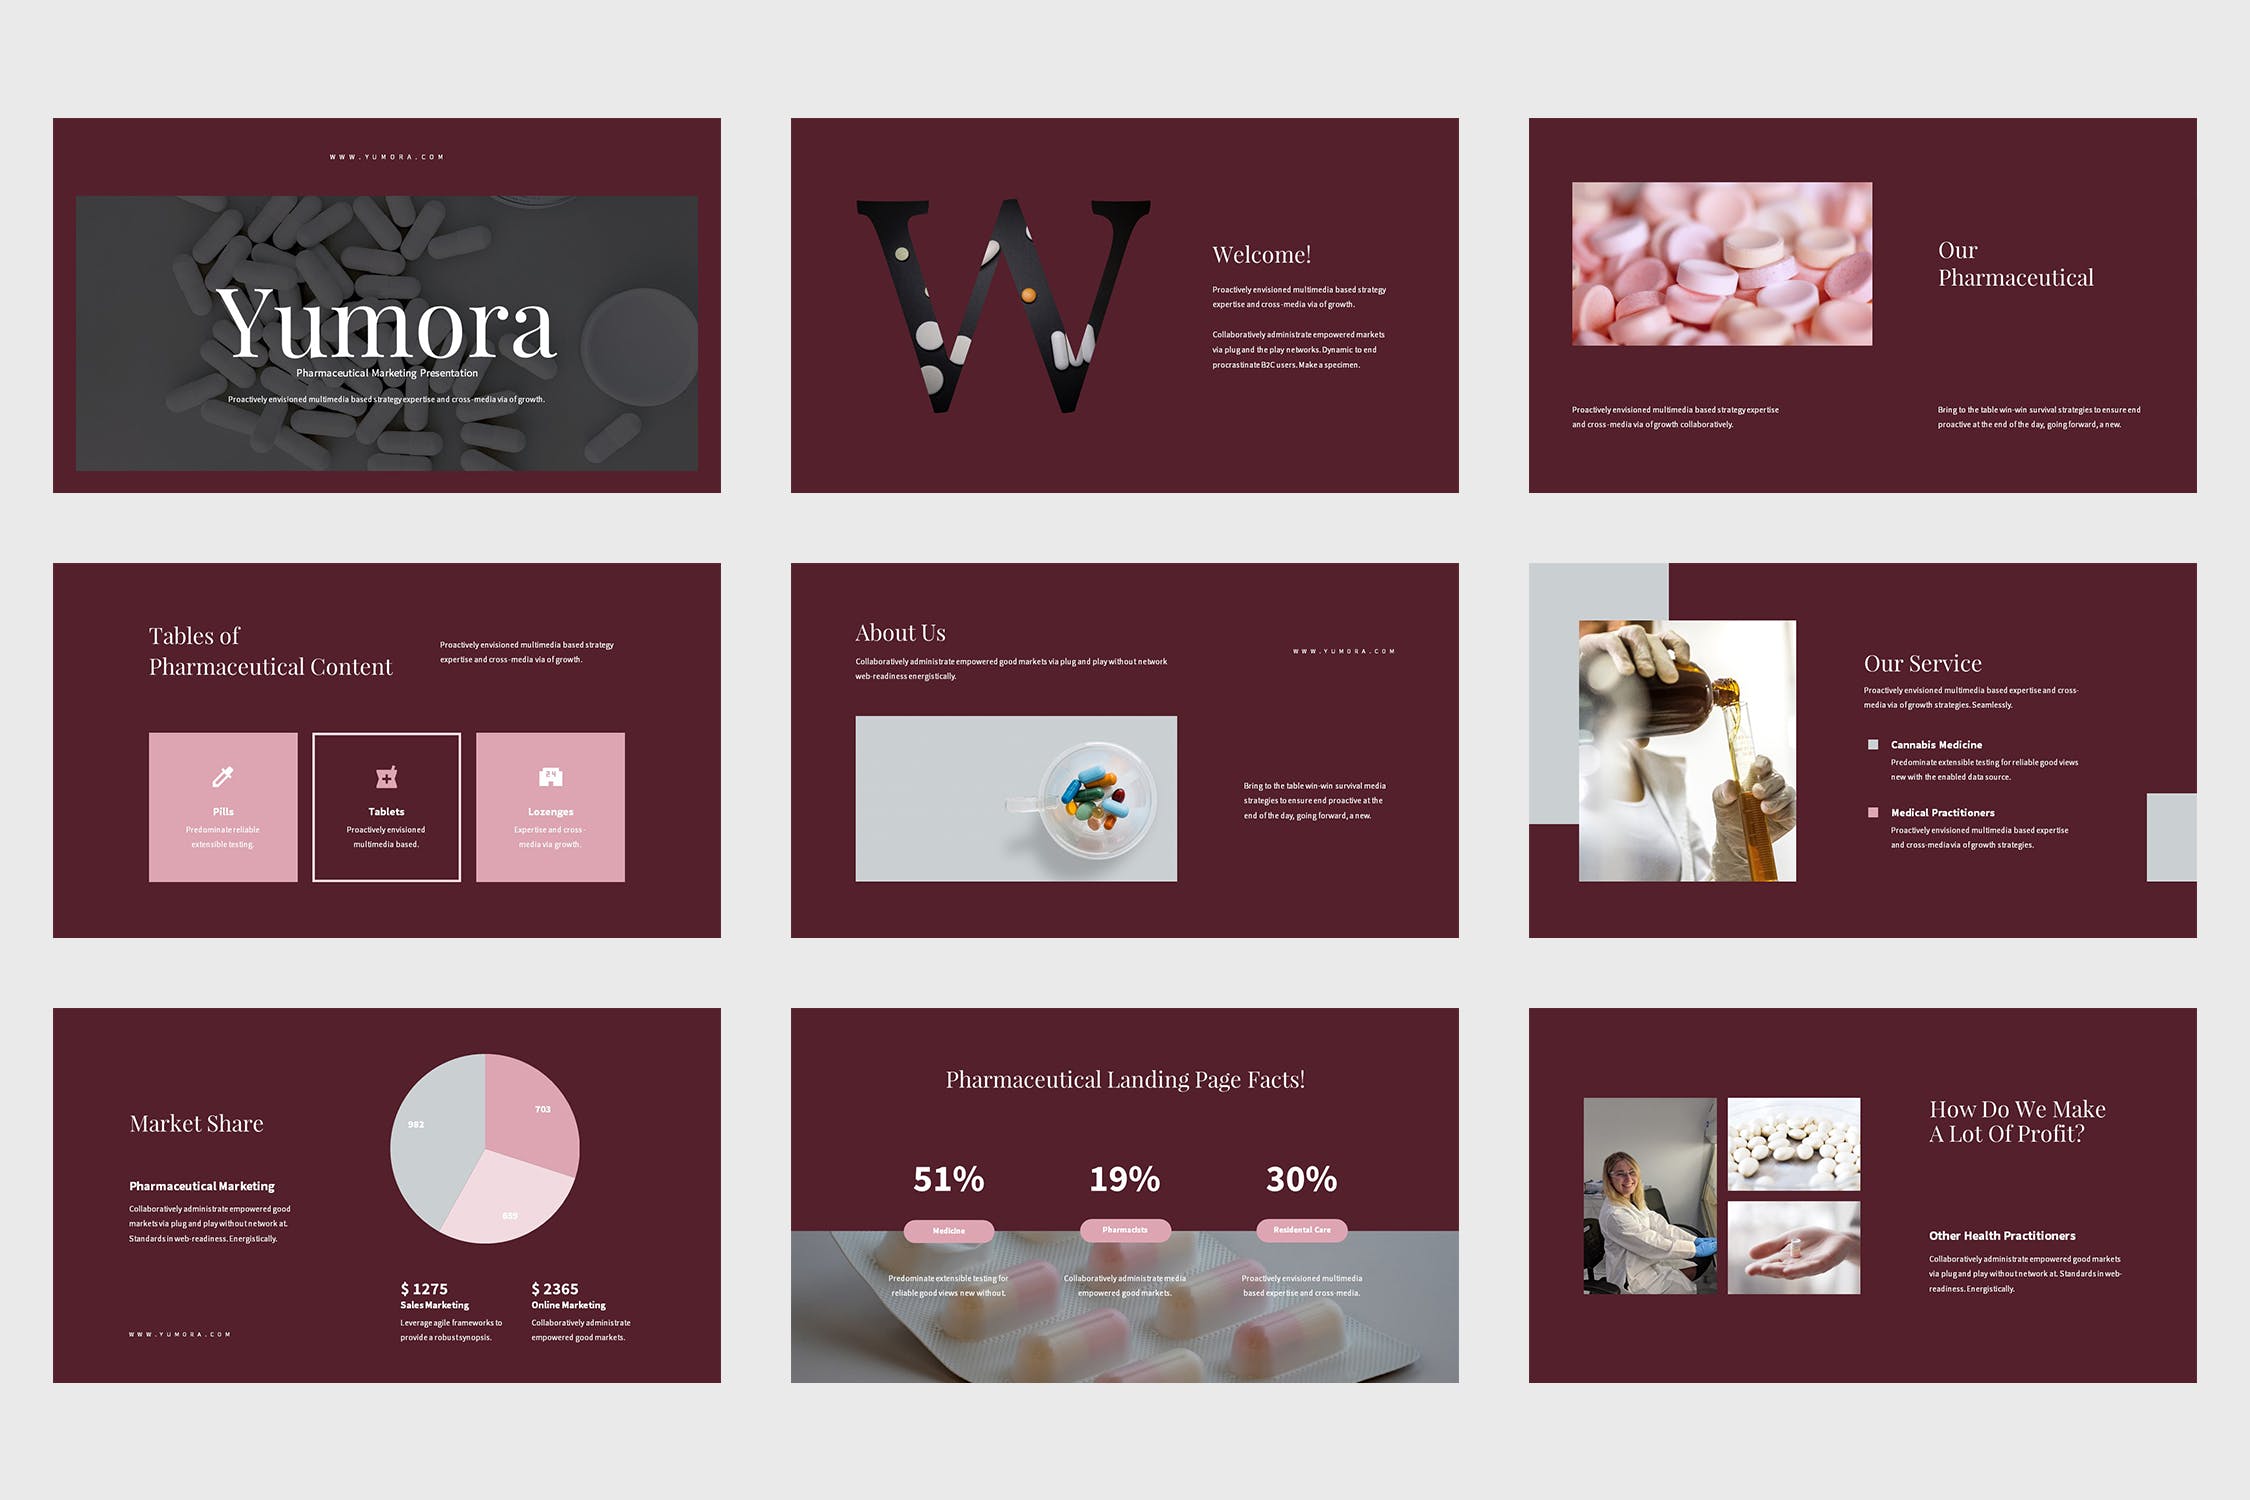 This layout is not limited for a single business or theme but can be used for different contents.